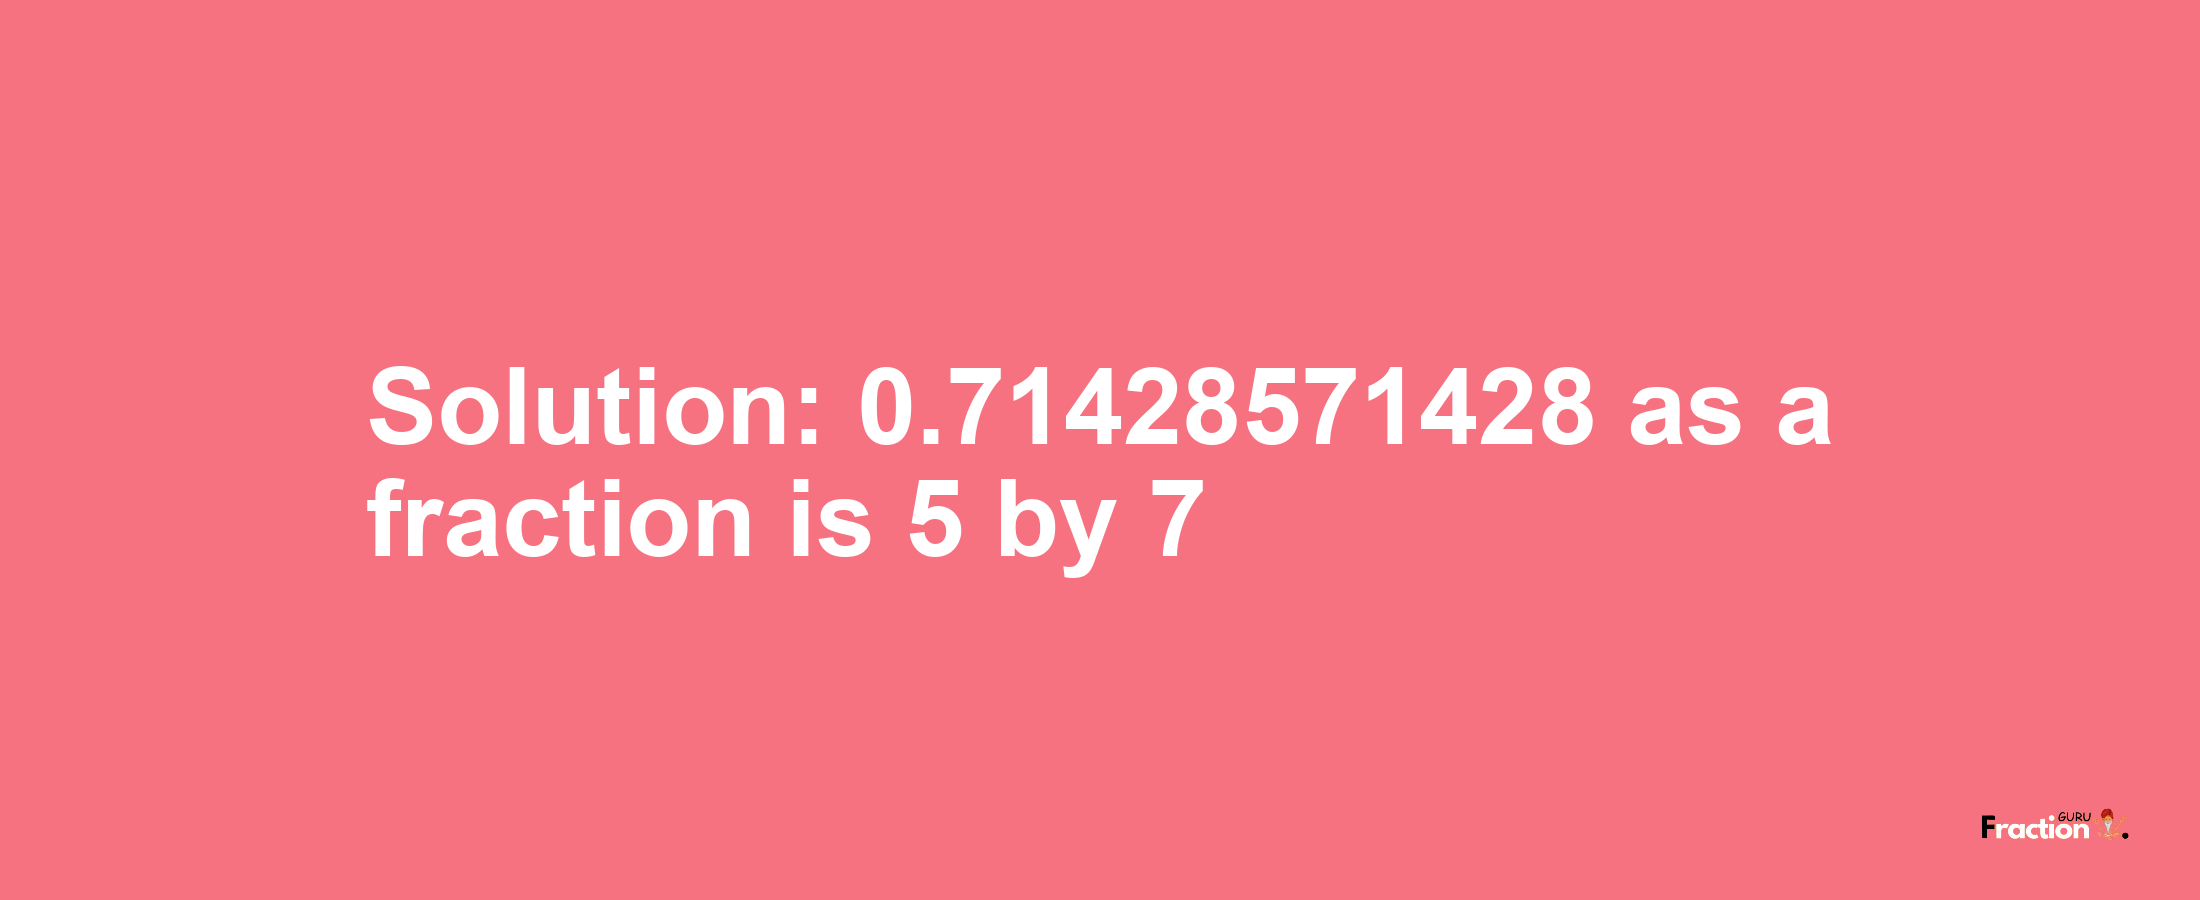 Solution:0.71428571428 as a fraction is 5/7